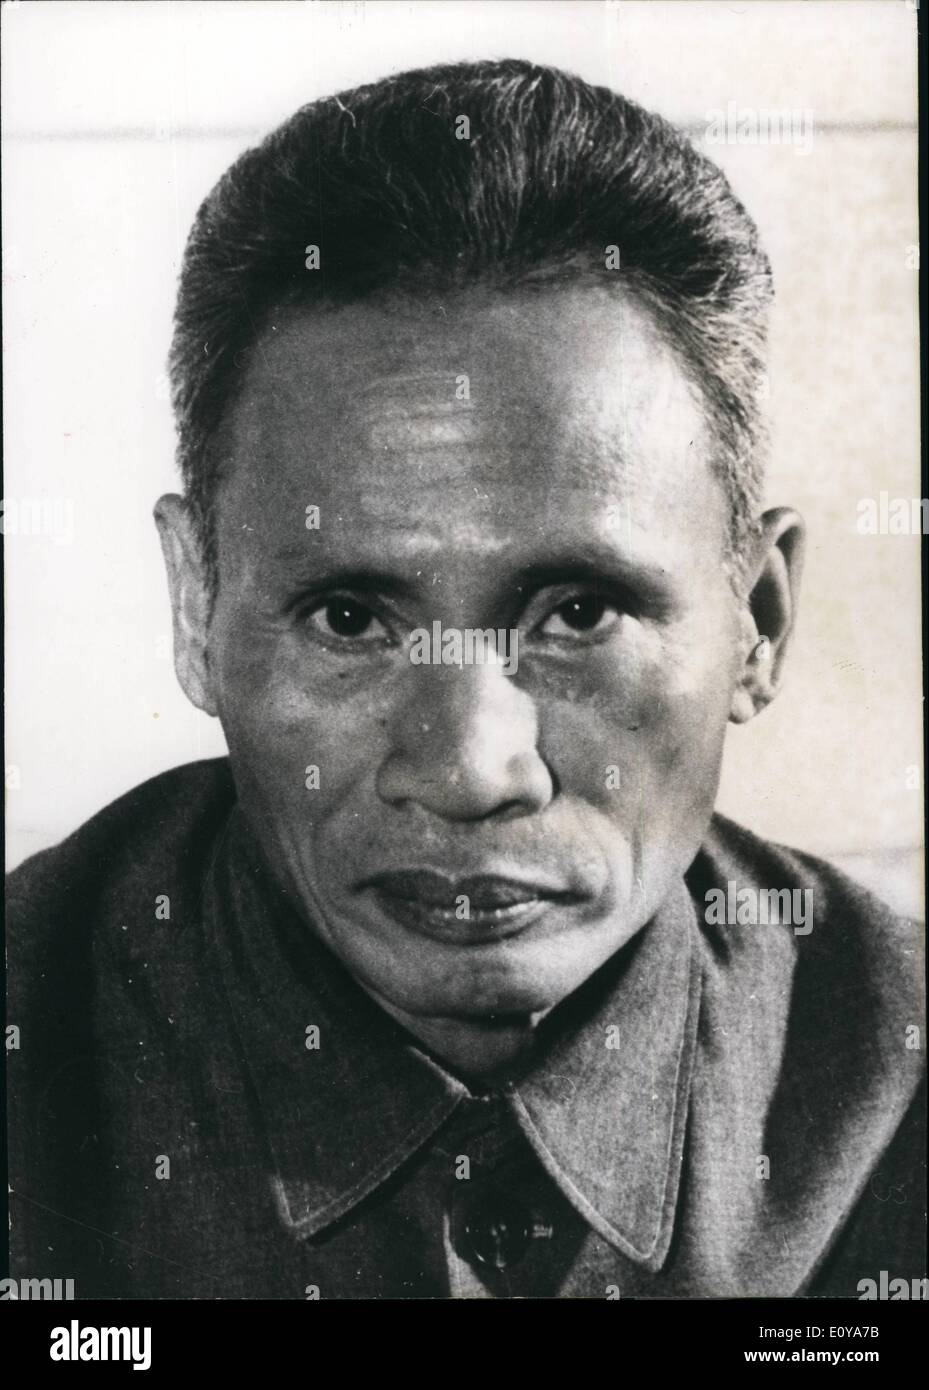 Sep. 09, 1969 - Phan Van Dong May Succeed Ho Chx Minh. Photo shows A Recent Portrait Of Phan Van Pong, Prime Minister Of The North Vietnamese Democratic Republic, A Possible Successor Of Ho Chx Minh. Stock Photo